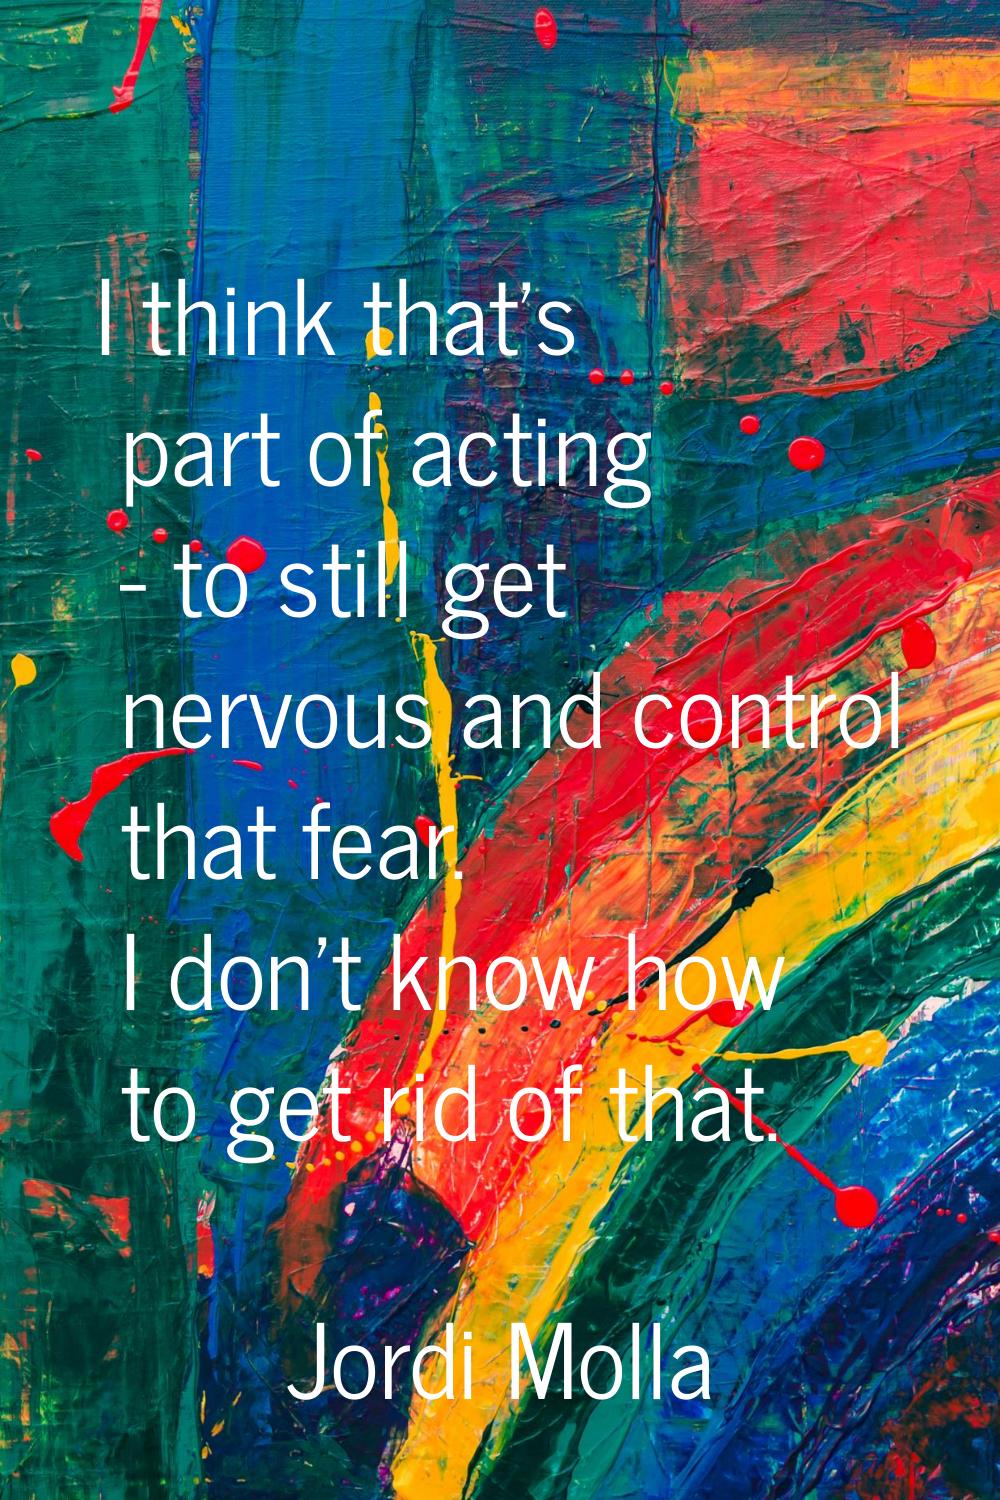 I think that's part of acting - to still get nervous and control that fear. I don't know how to get